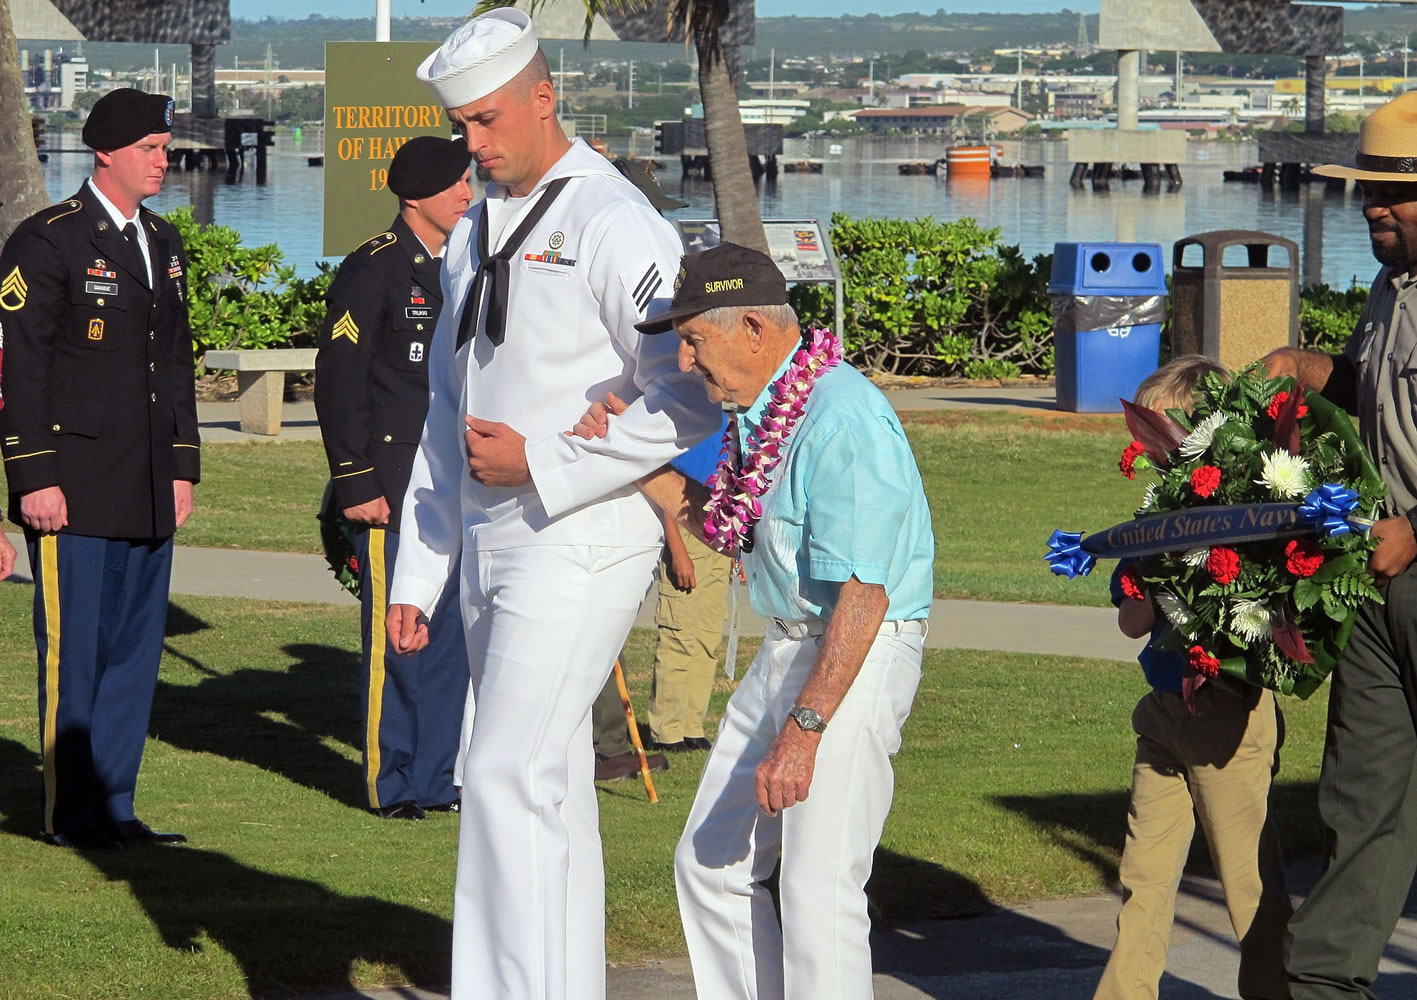 A Navy sailor escorts Navy veteran and Pearl Harbor survivor John Chapman during a ceremony to mark the 73rd anniversary of the Japanese attack on Pearl Harbor on Sunday at Pearl Harbor, Hawaii. The attack launched the U.S.